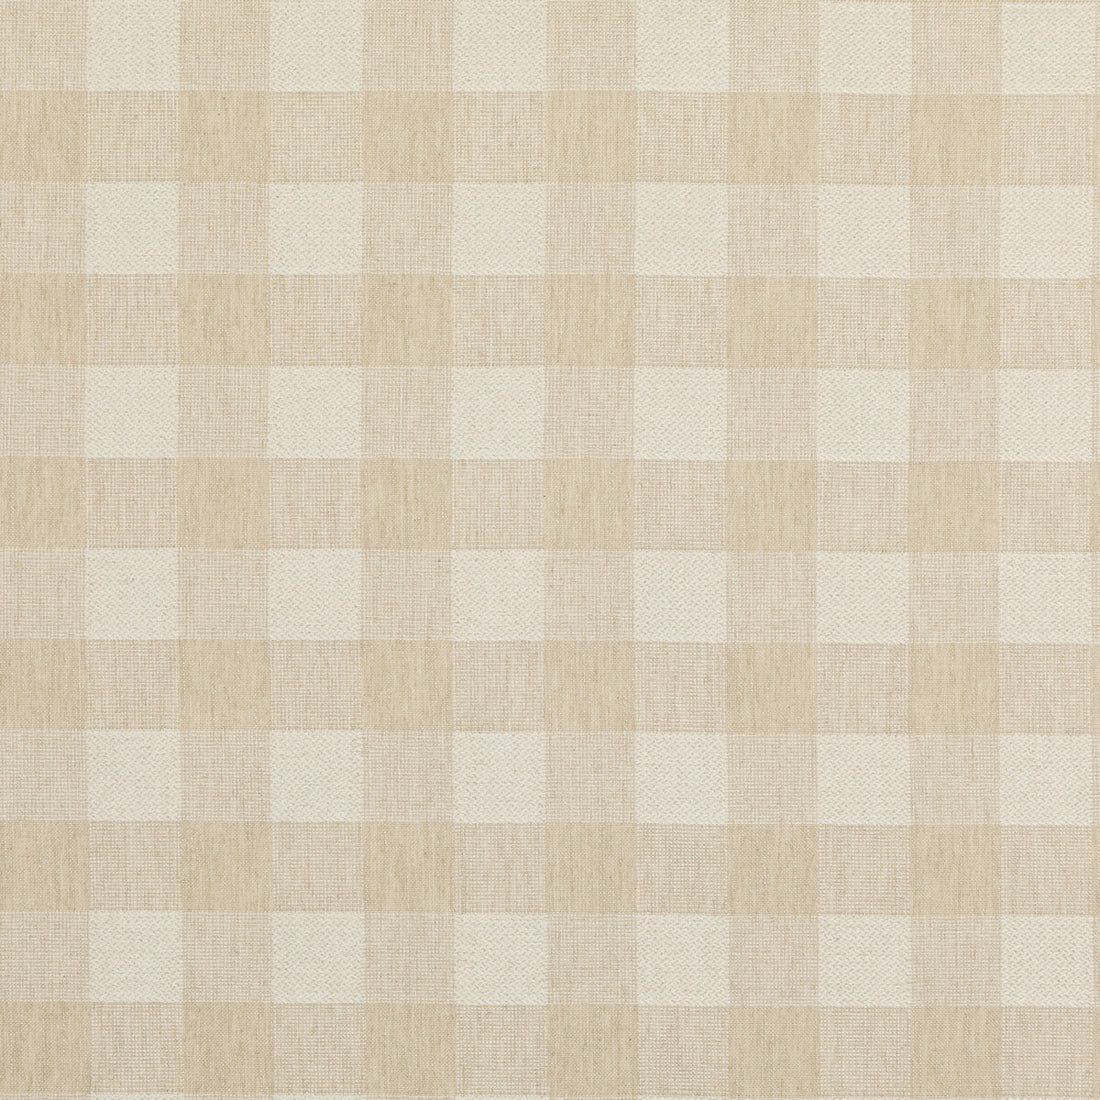 Block Check fabric in linen color - pattern PF50490.110.0 - by Baker Lifestyle in the Block Weaves collection